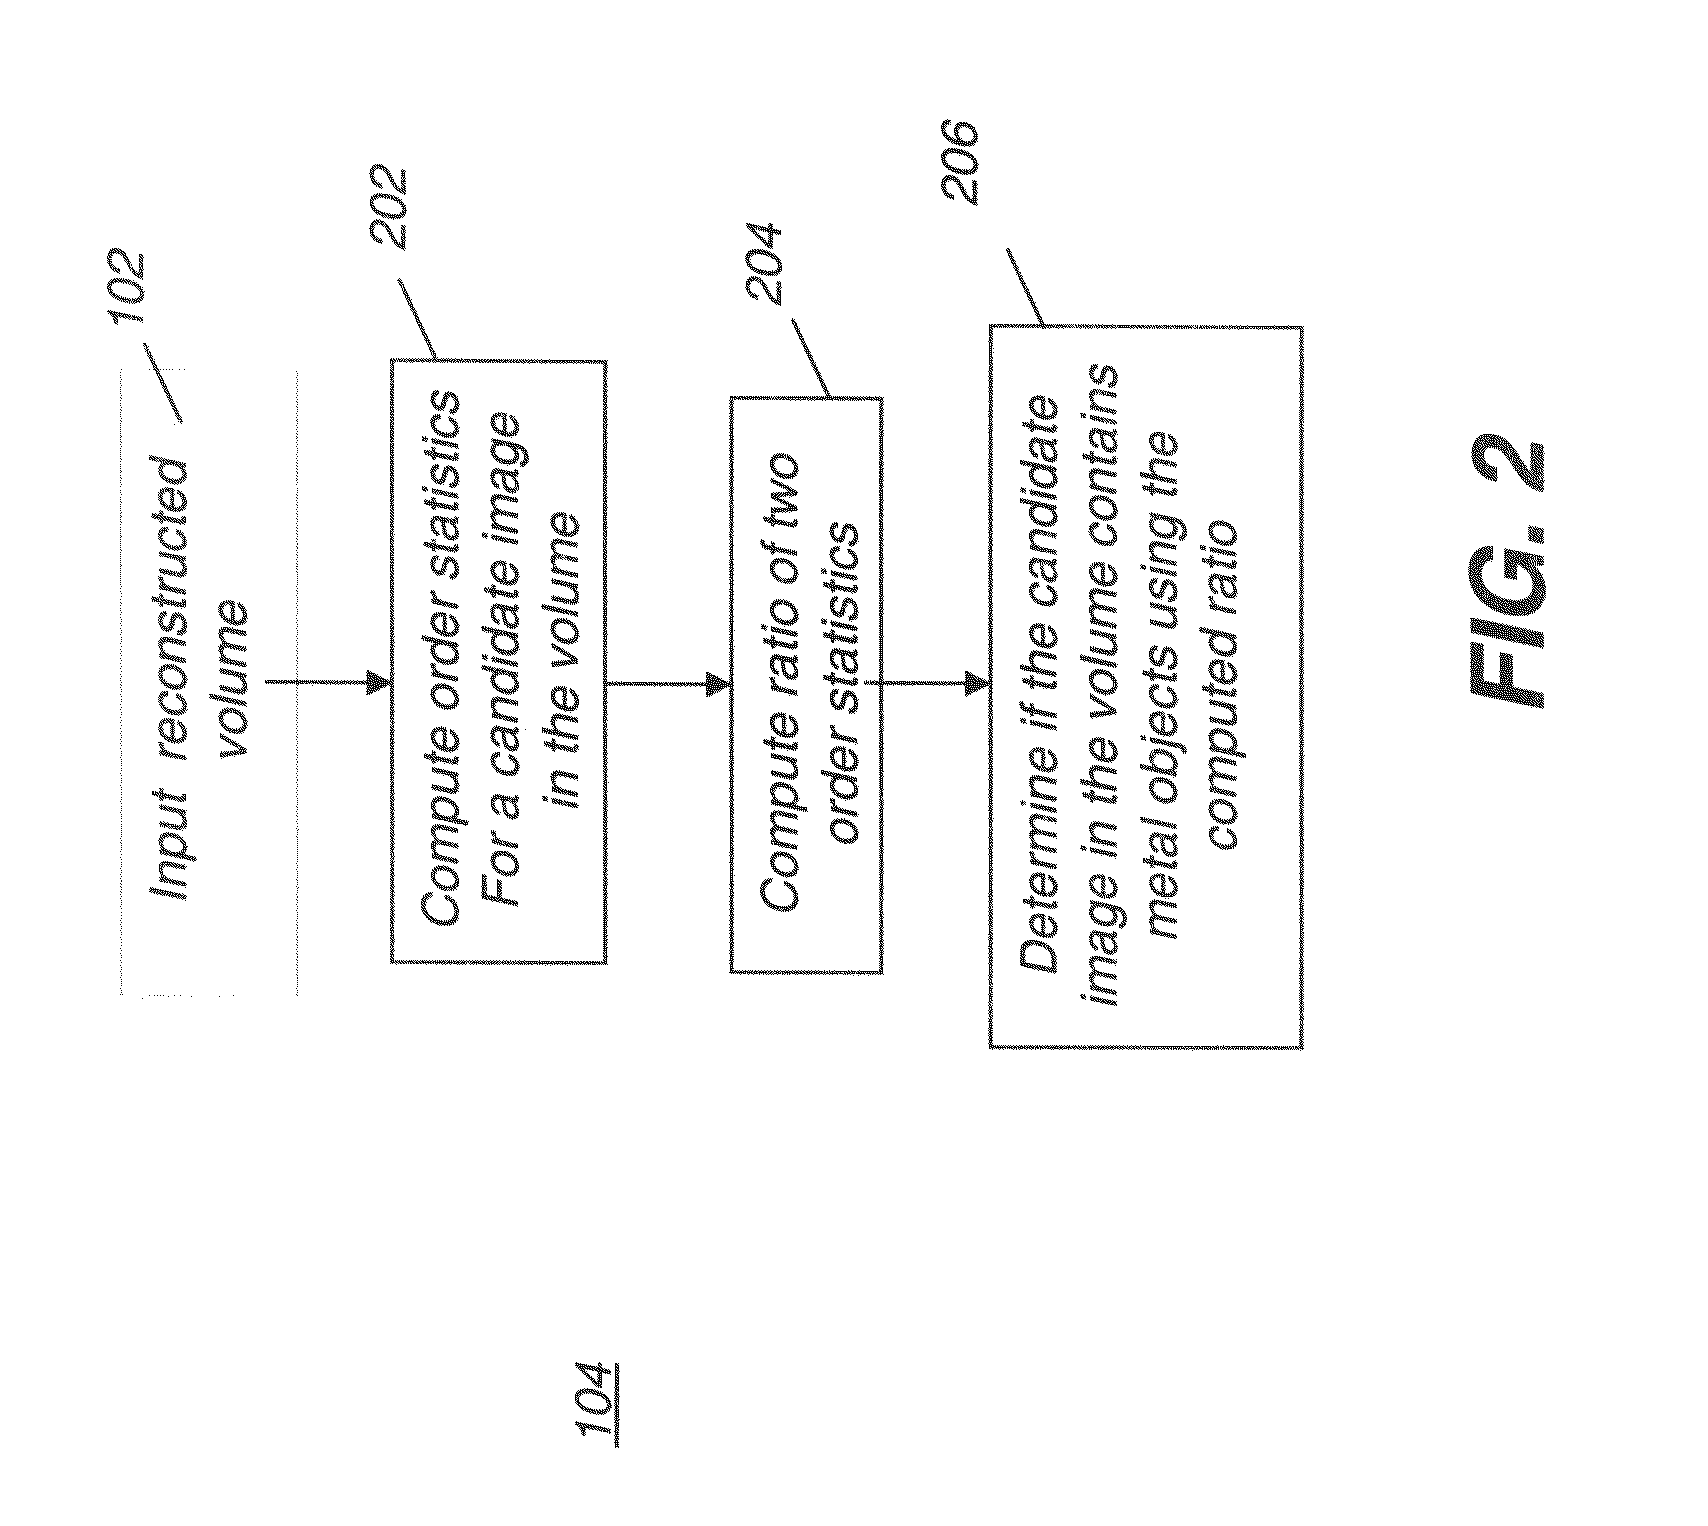 Method and system for cone beam computed tomography high density object artifact reduction